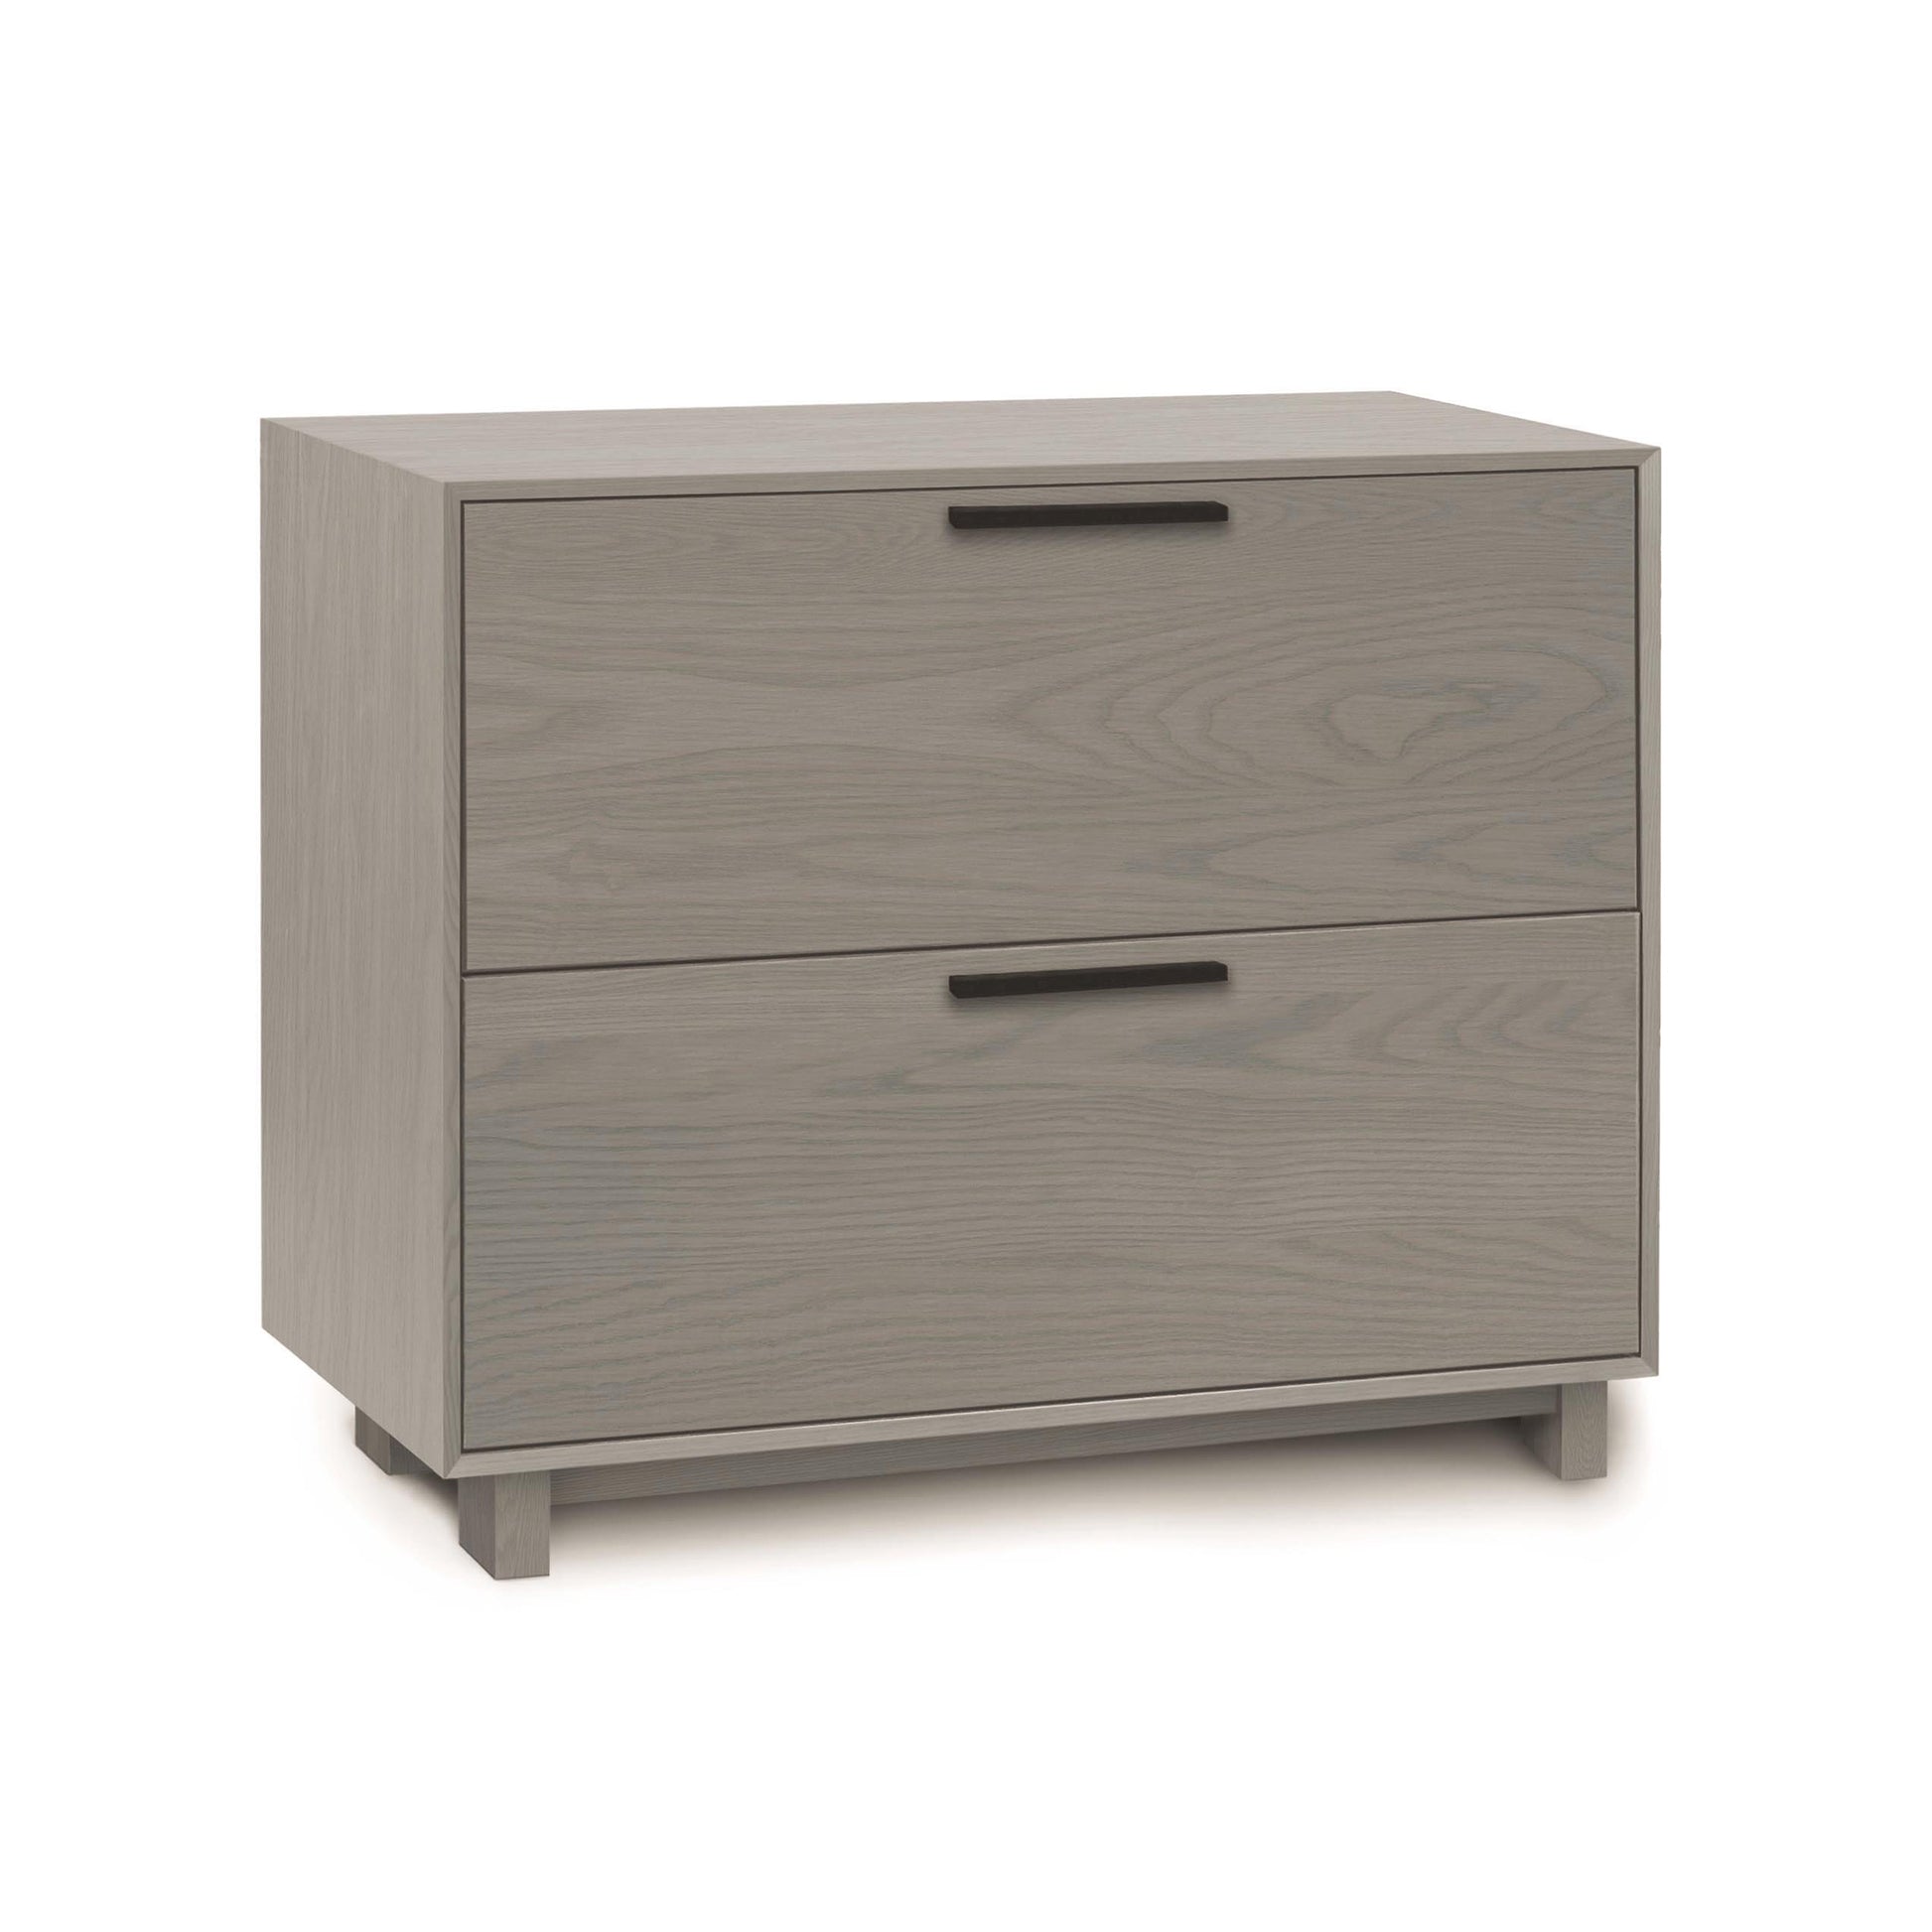 A Linear Lateral File Cabinet with two drawers made of sustainable hardwood by Copeland Furniture on a white background.